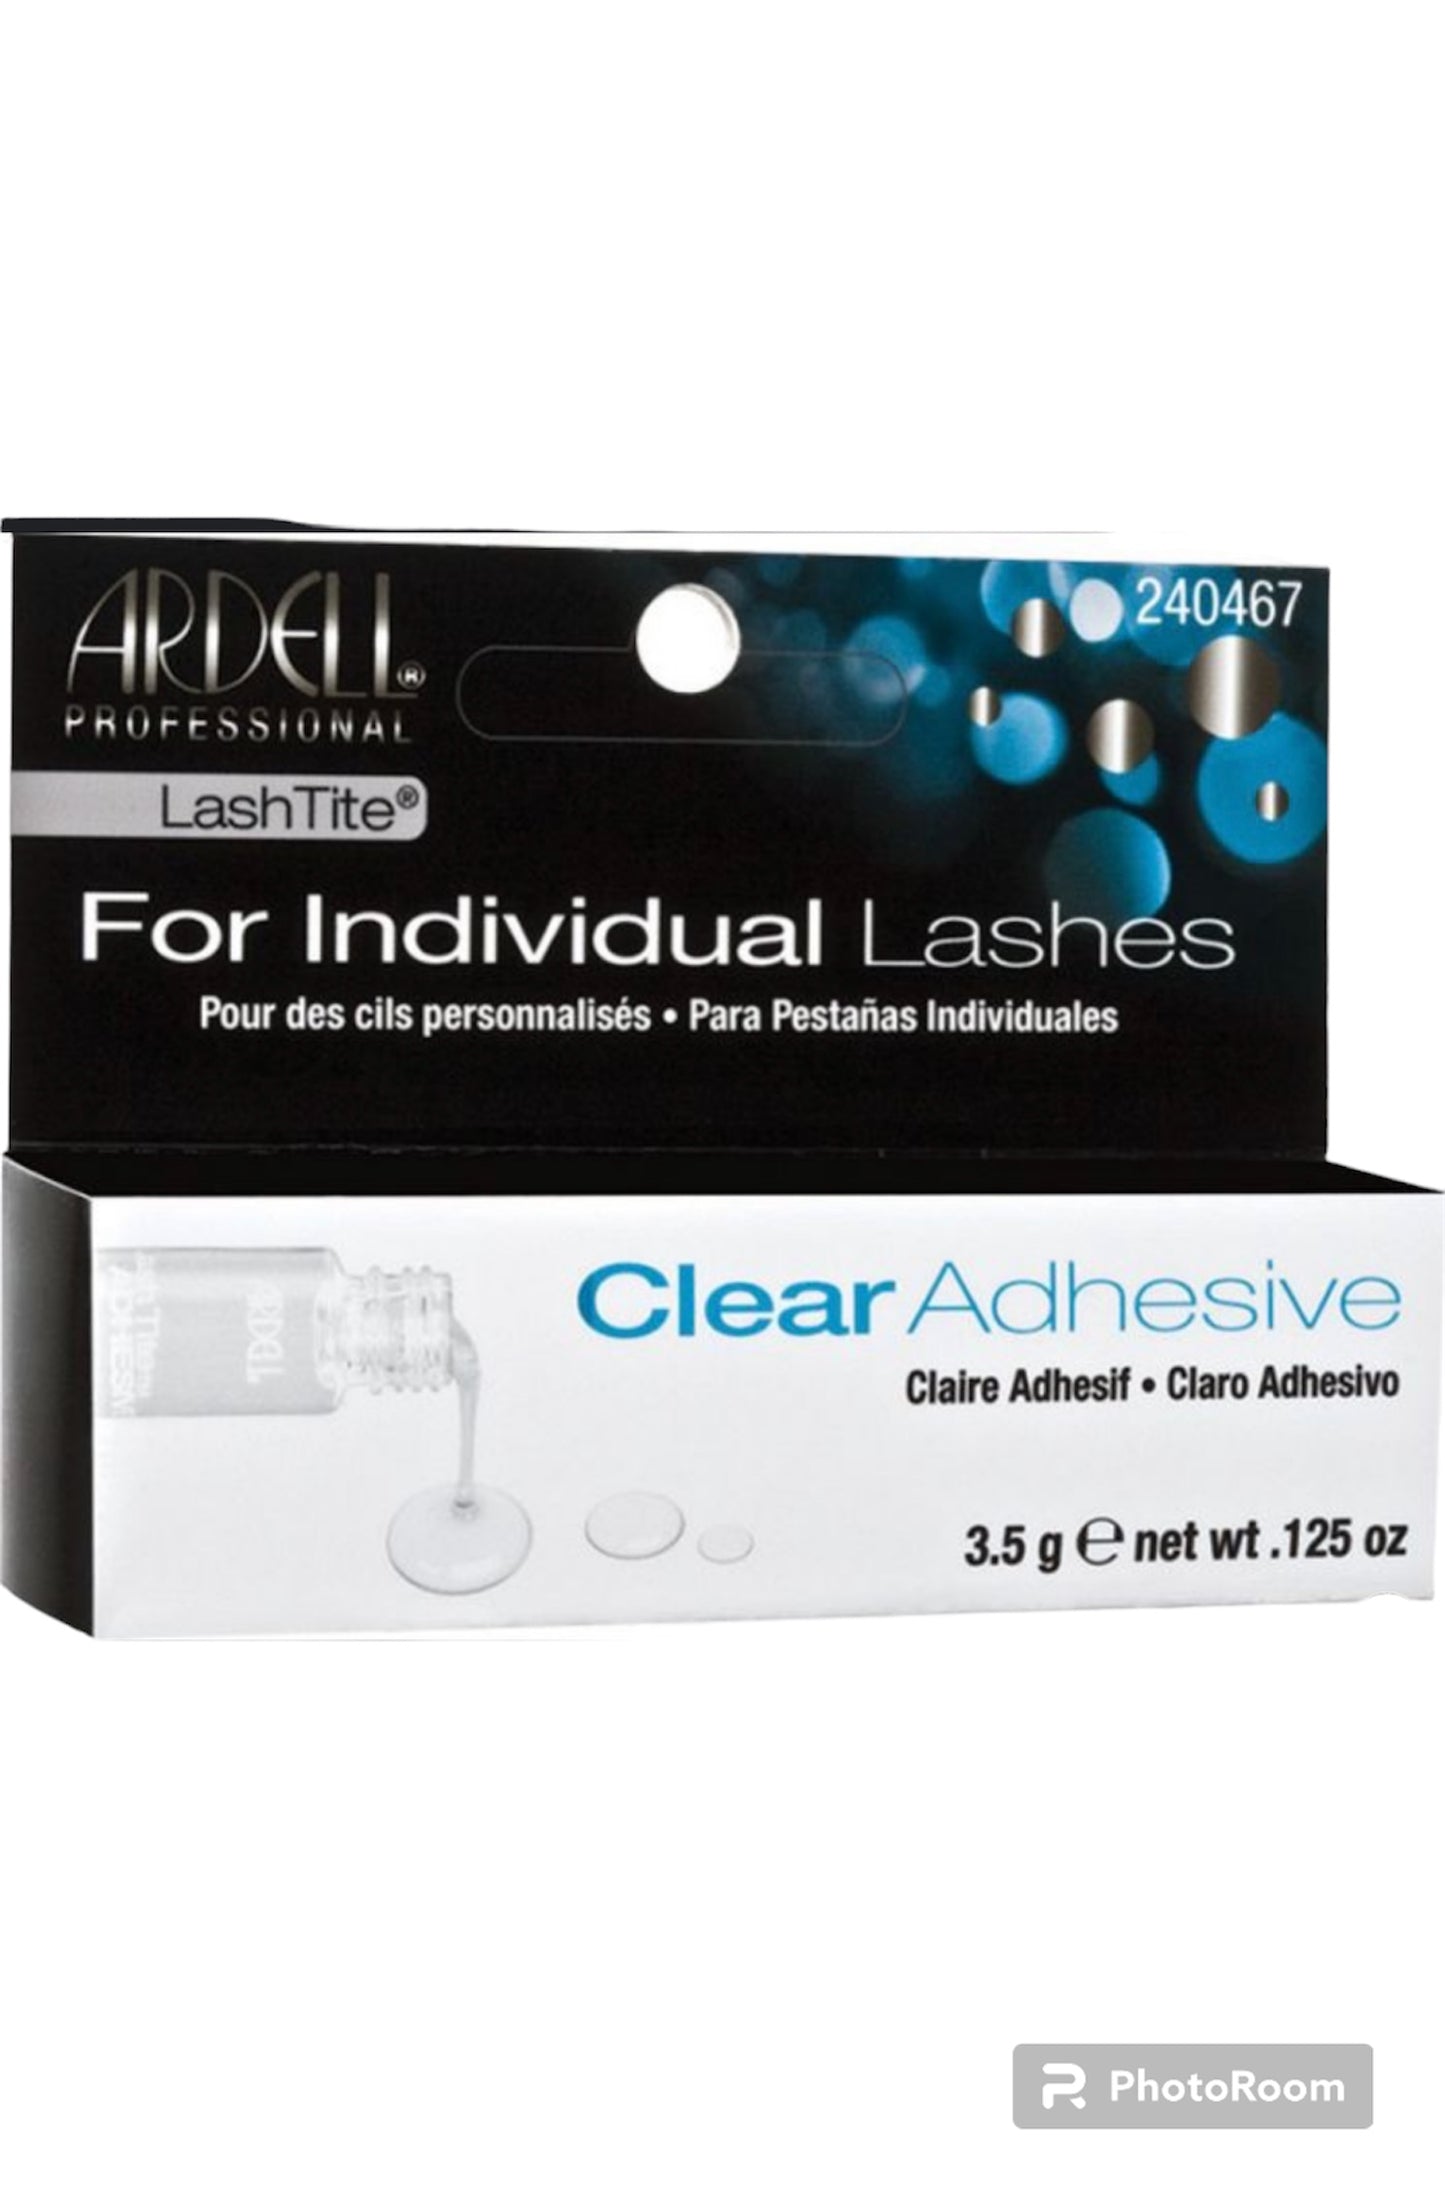 ARDELL PROFESSIONAL Clear Adhesive 3.5g/net wt .125 oz